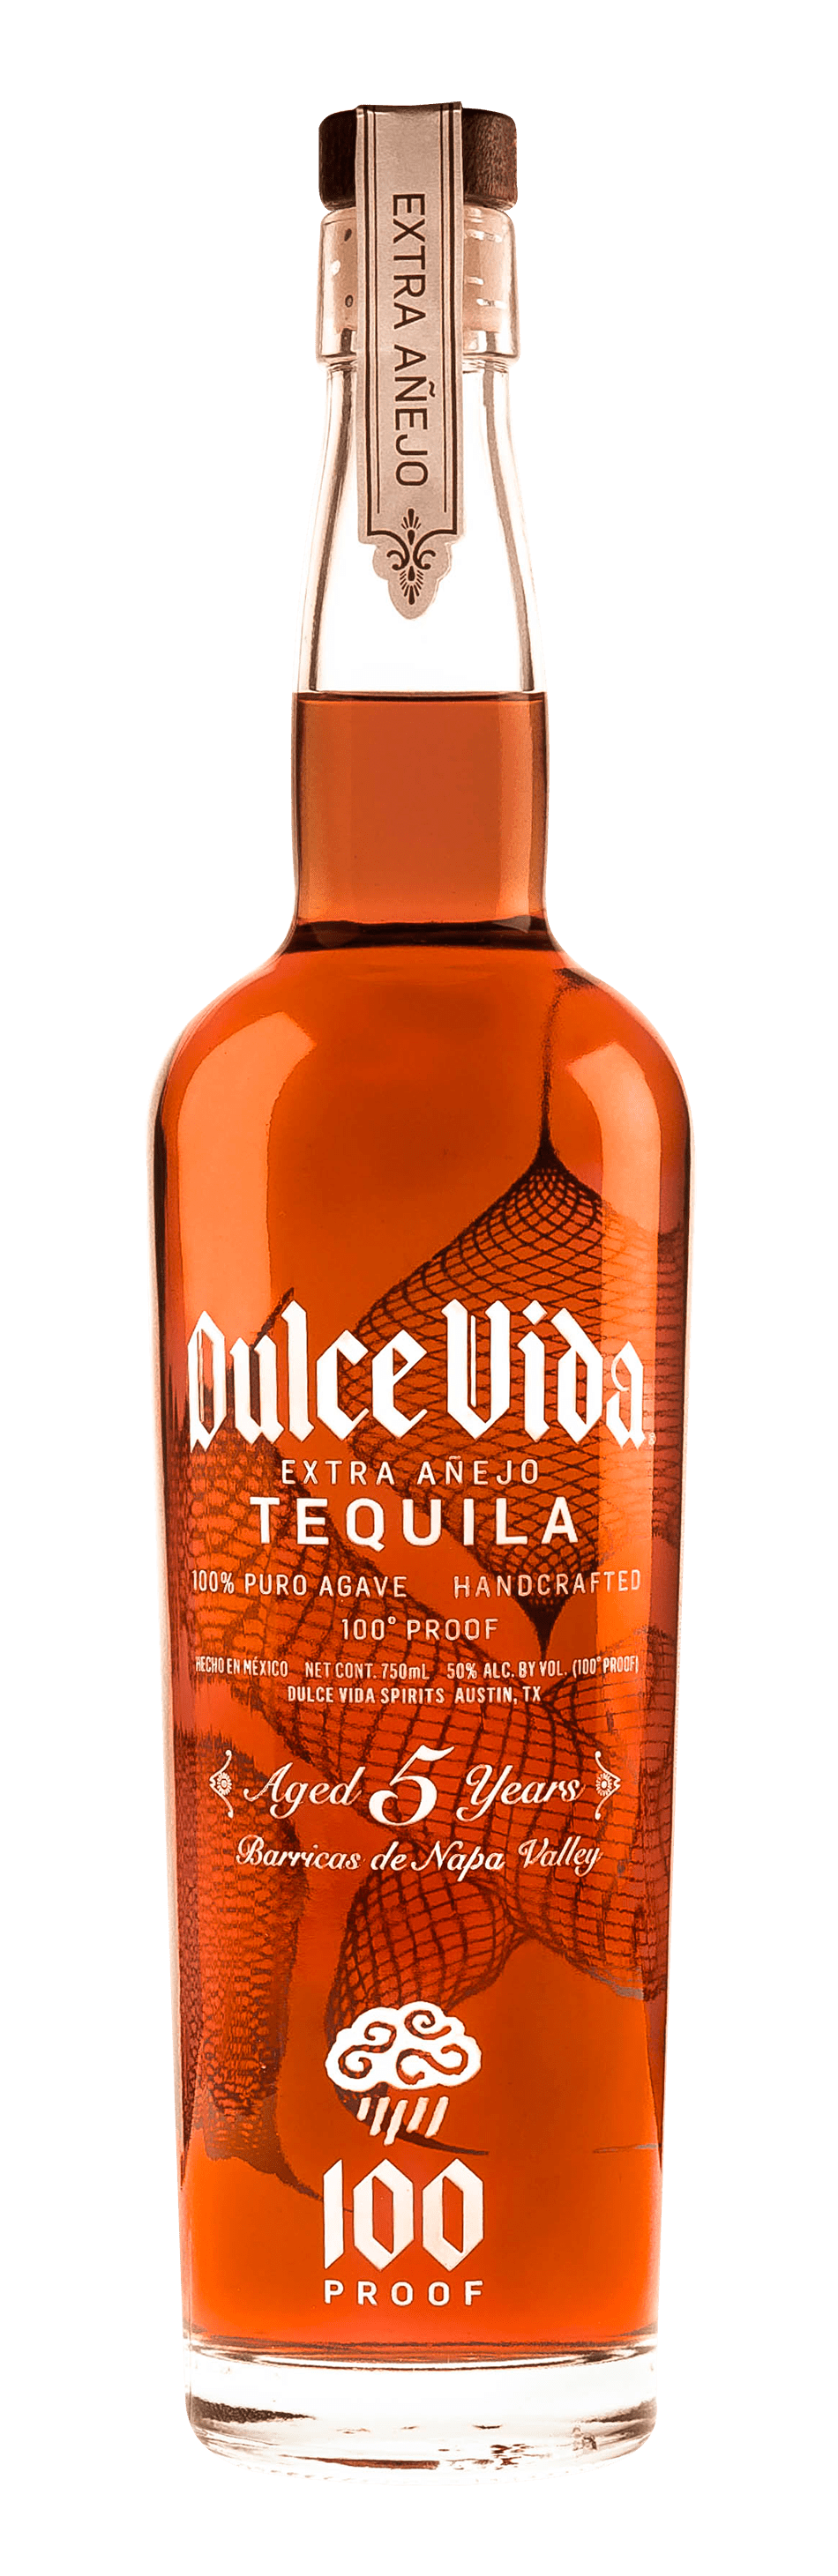 Dulce Vida 5 Year Old Extra Anejo Tequila - Barbank